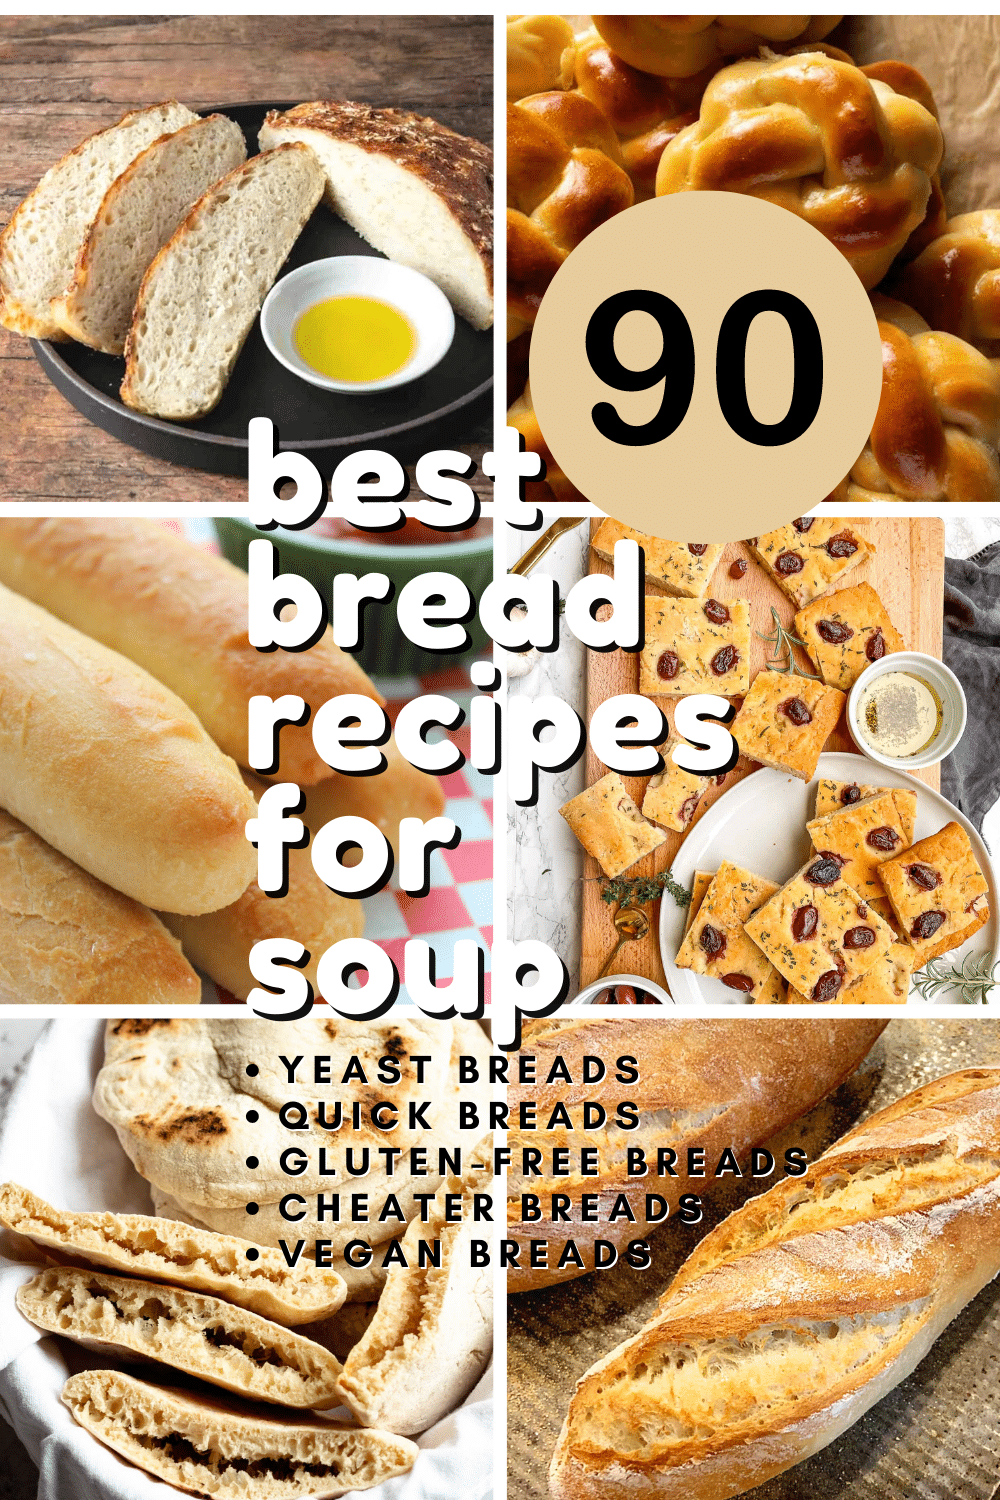 Pin for 90 recipes of the best bread for soup with images of 6 different bread recipes rustic bread, challah bread, white bread, focaccia bread, pita bread and French bread.